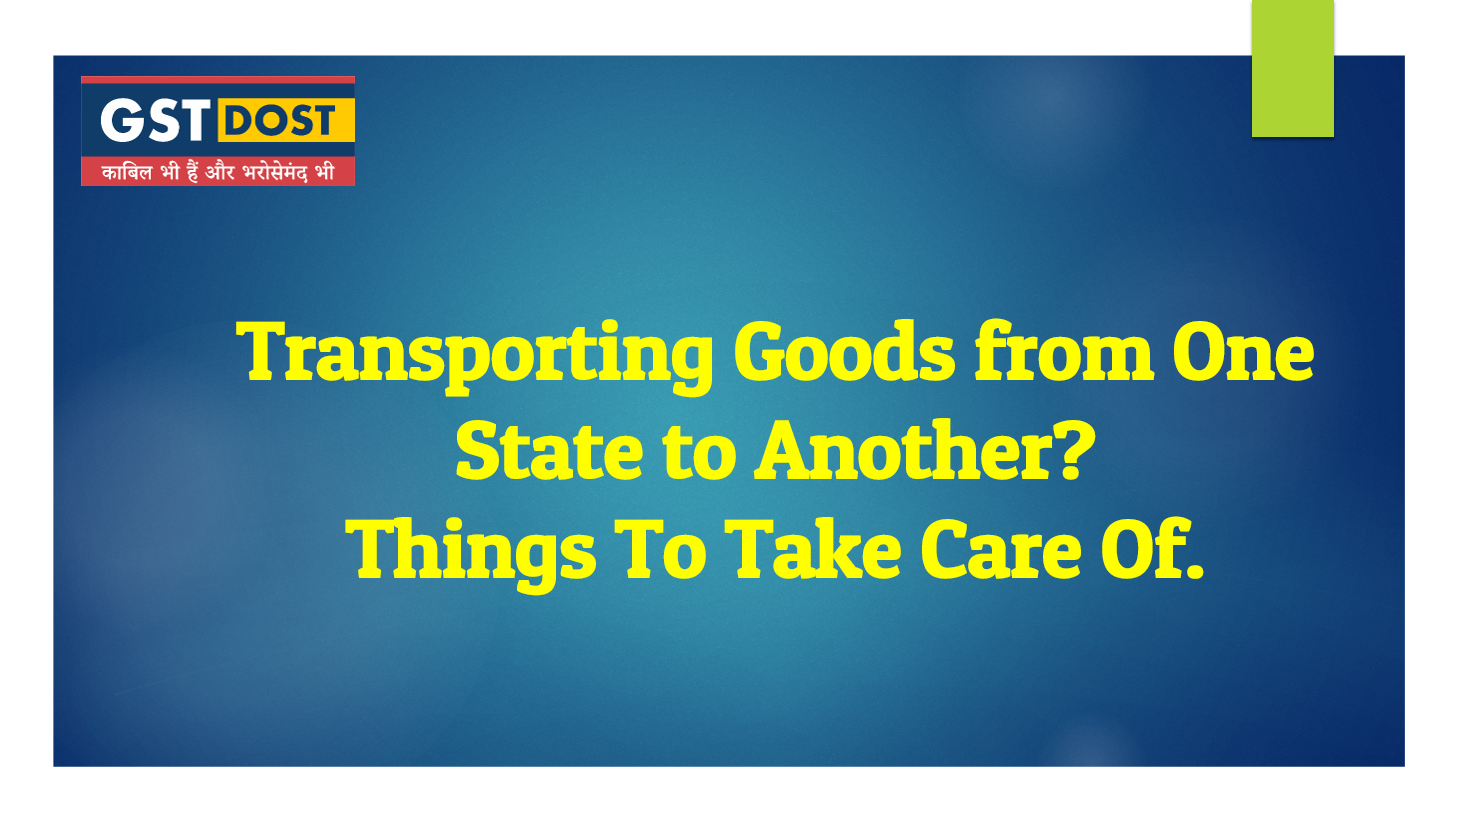 Transporting Goods from One State to Another. Things To Take Care Of.